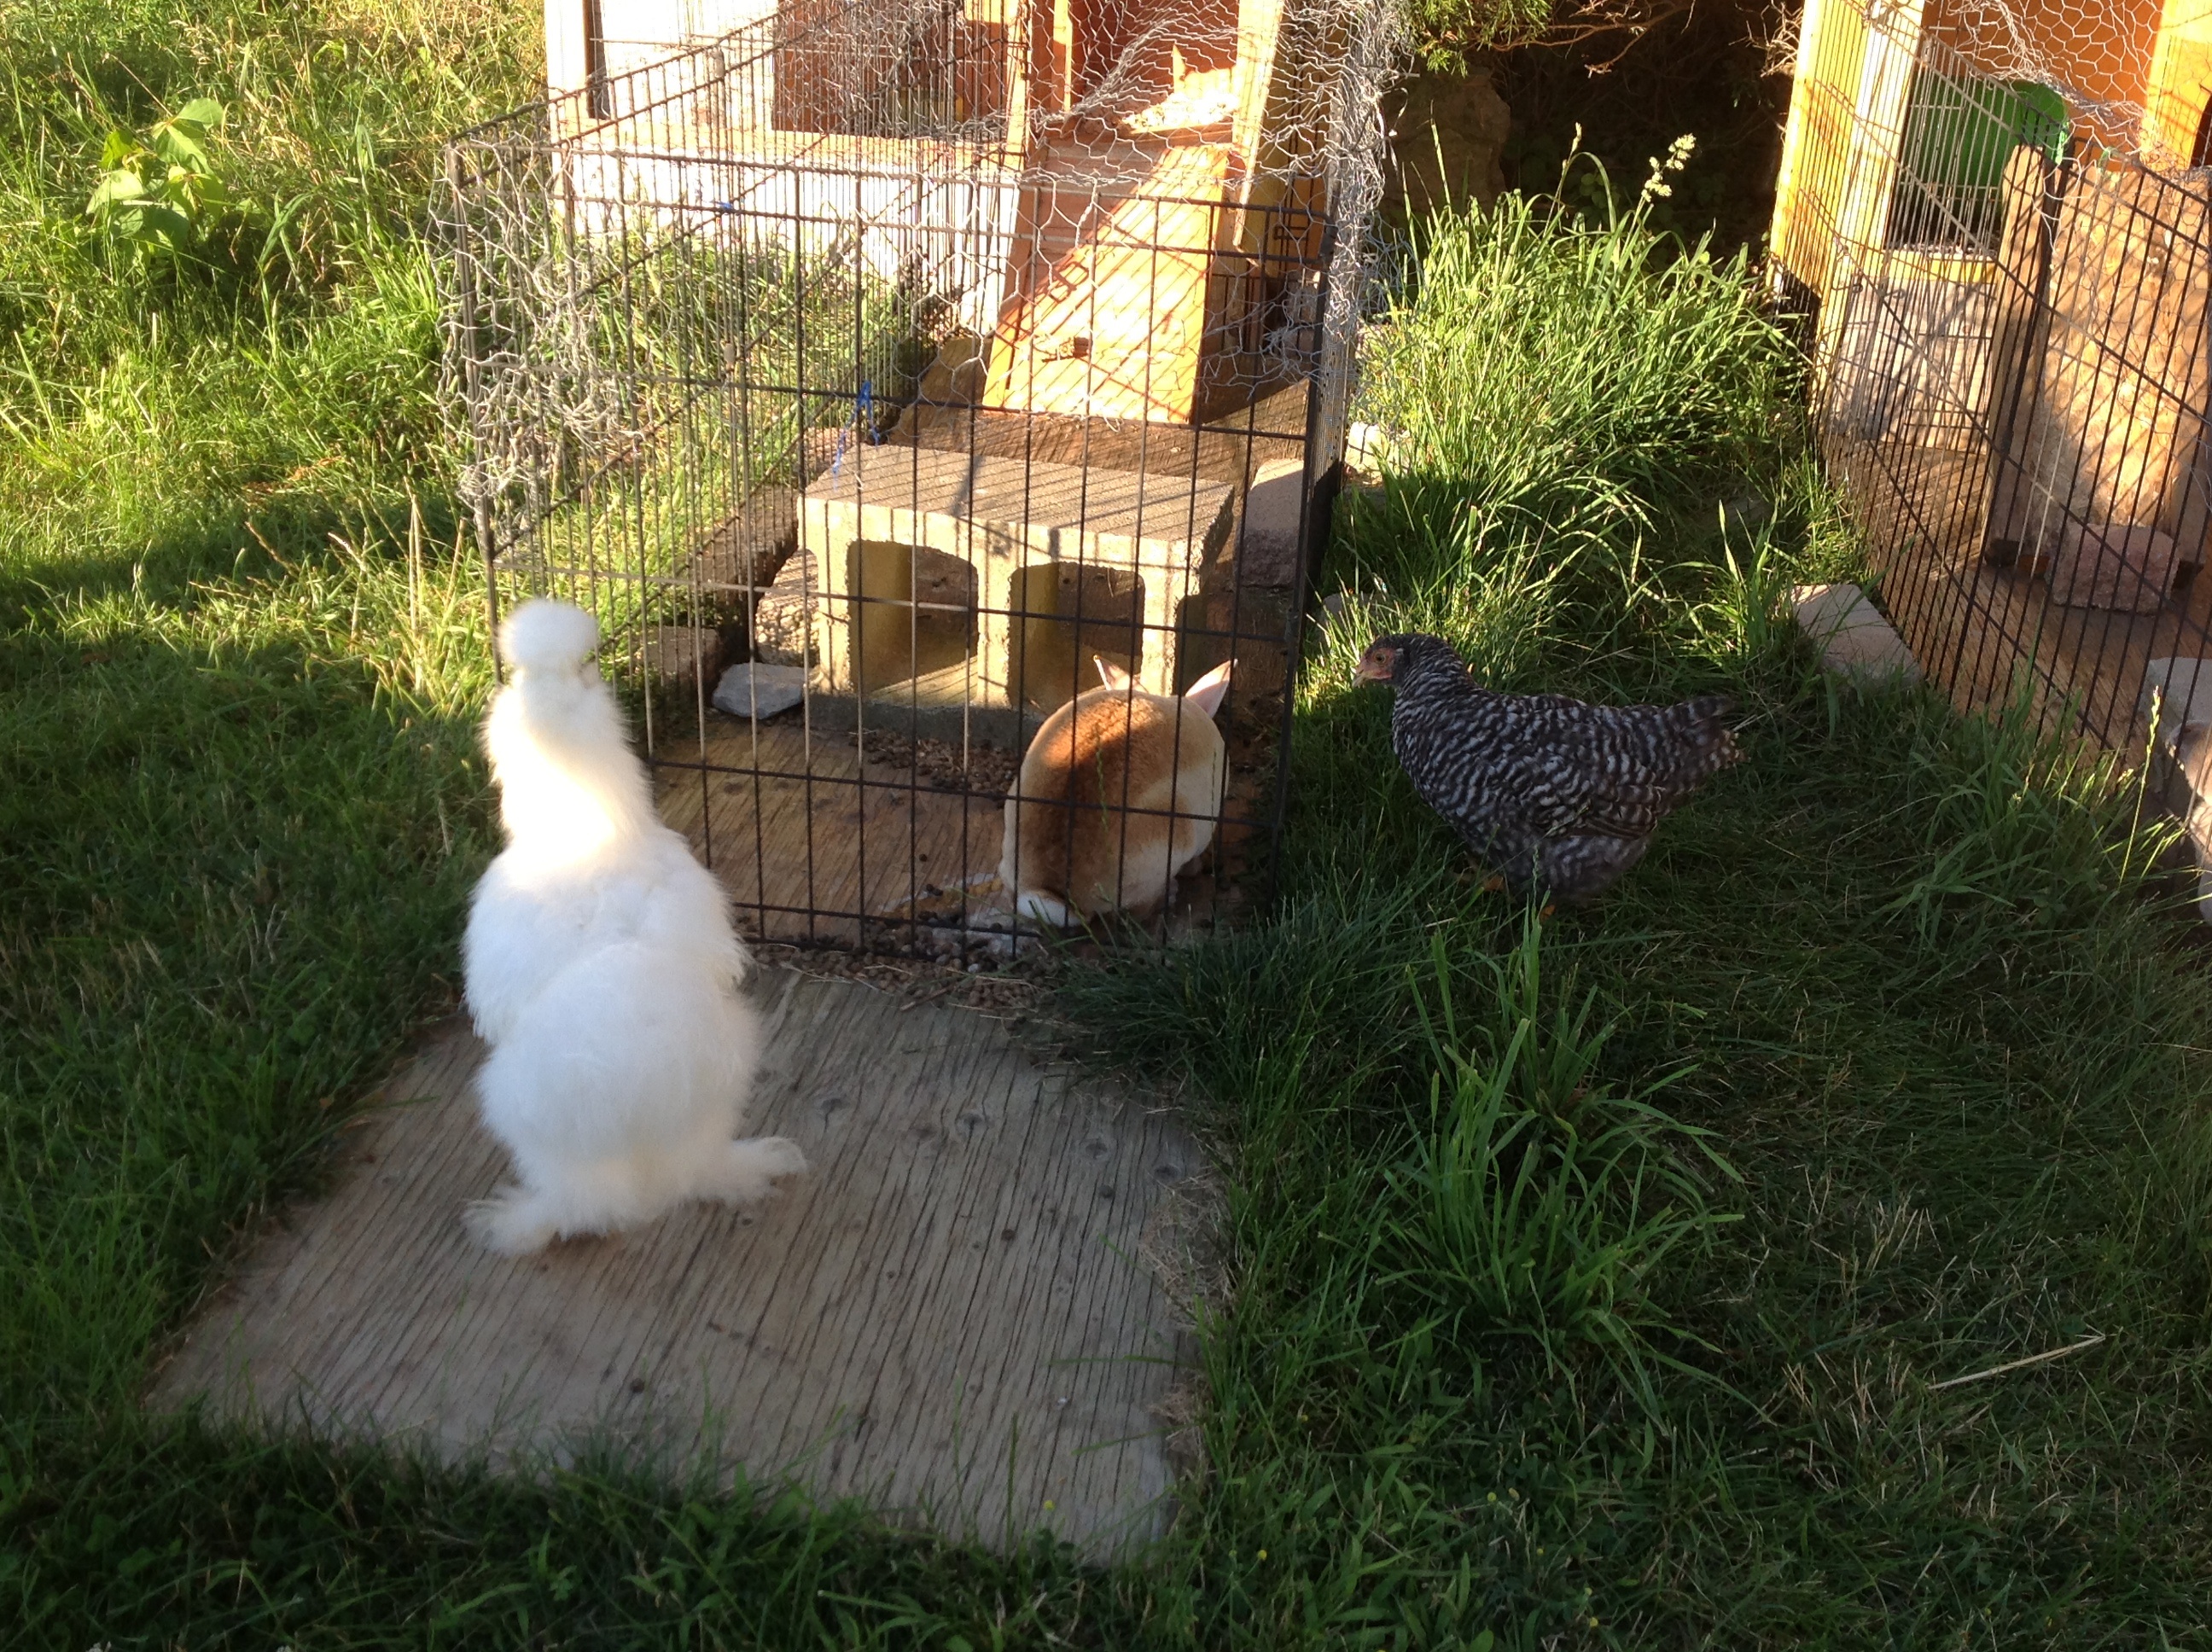 Checking out the rabbits :)